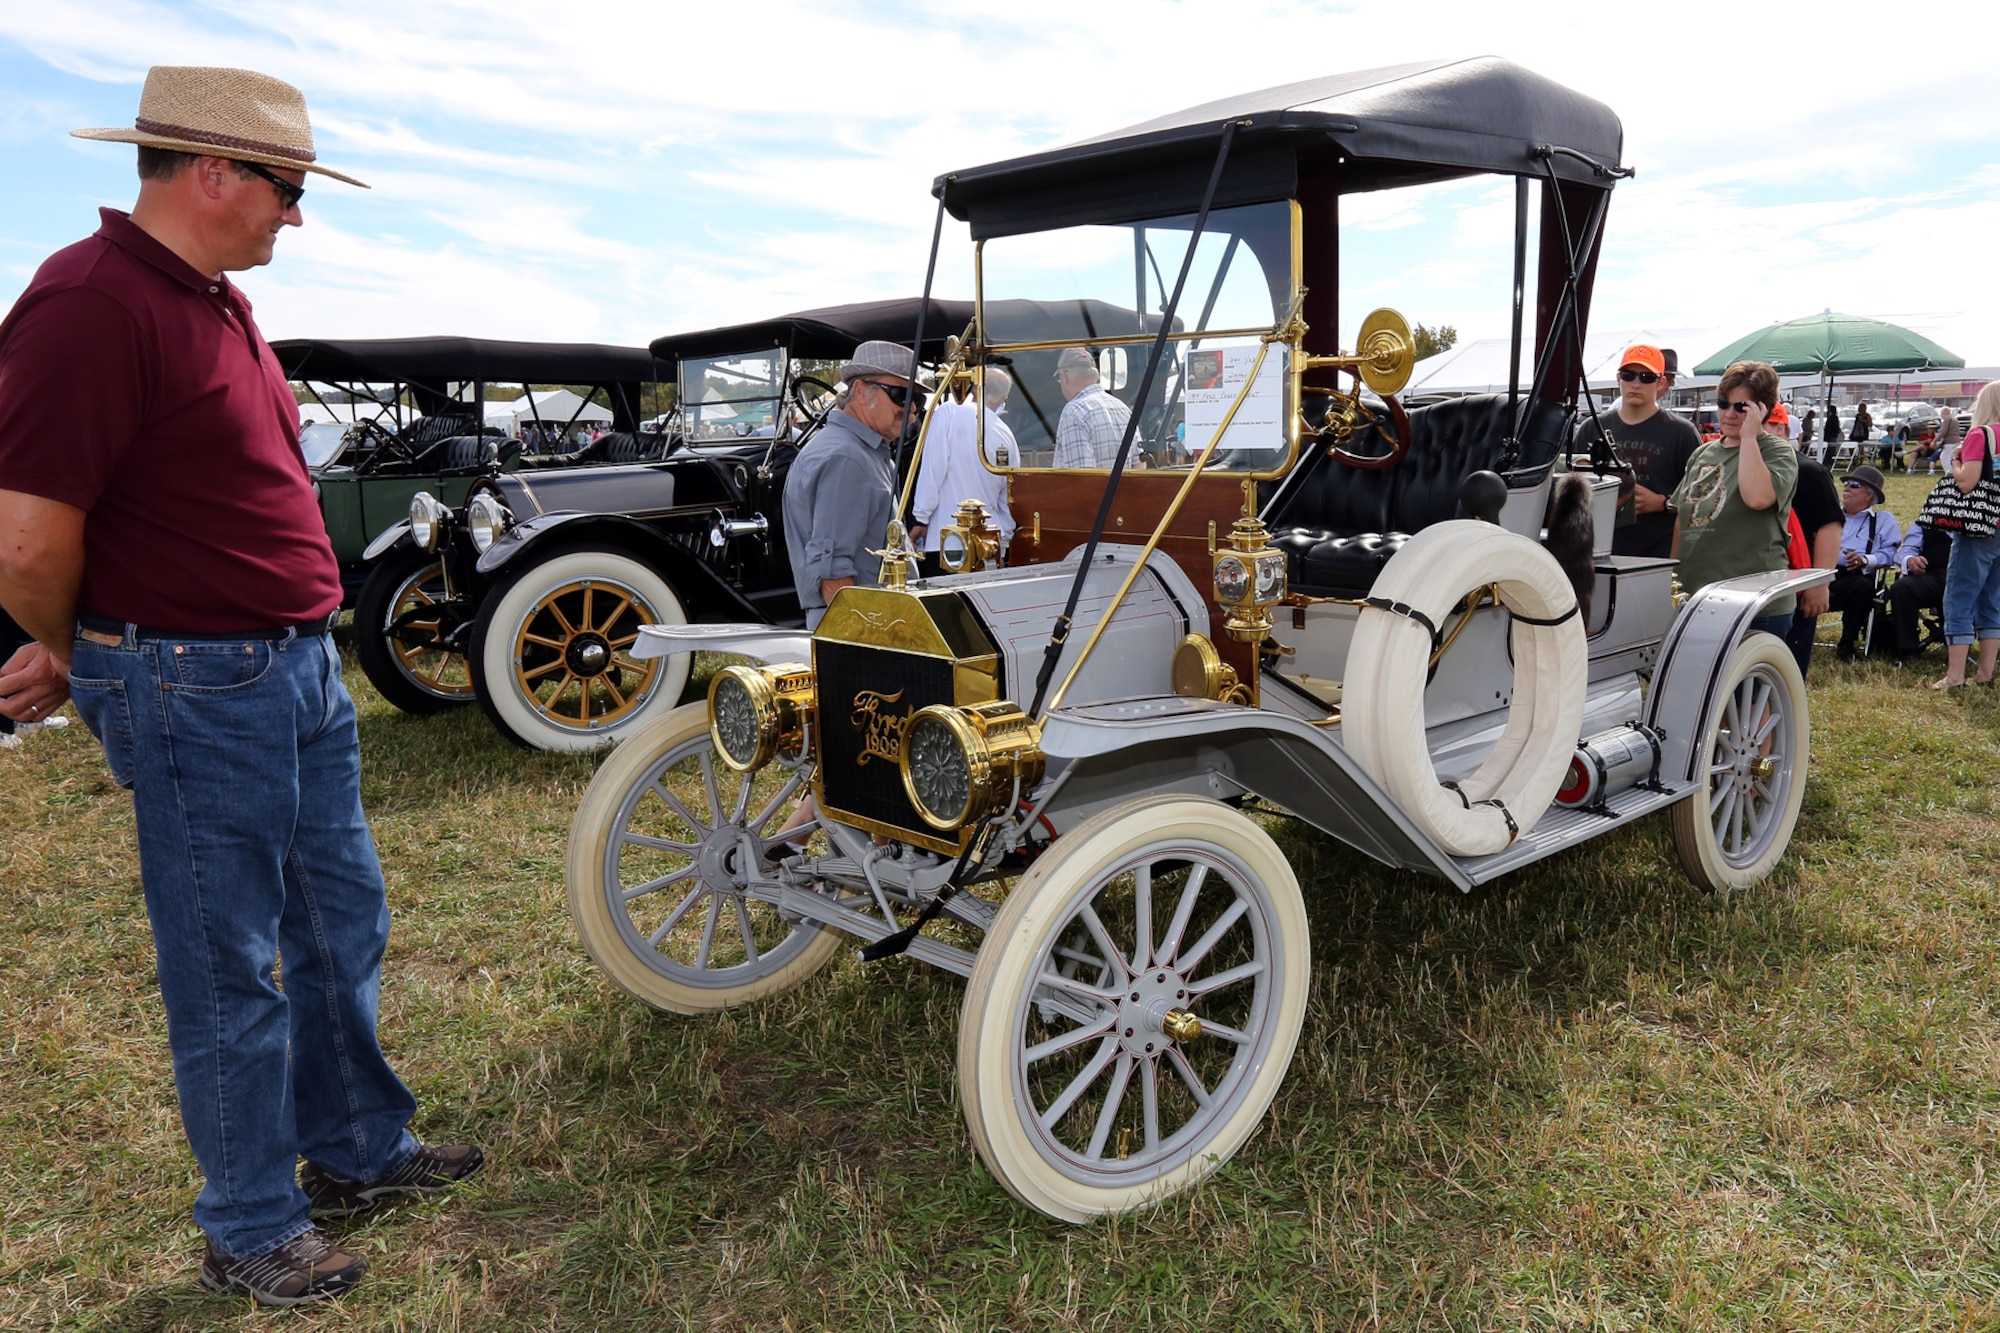 DAYTON, Ohio -- More than 20 antique automobiles were displayed and paraded around the grounds during the Ninth WWI Dawn Patrol Rendezvous on Sept. 27-28, 2014. (U.S. Air Force photo by Don Popp)